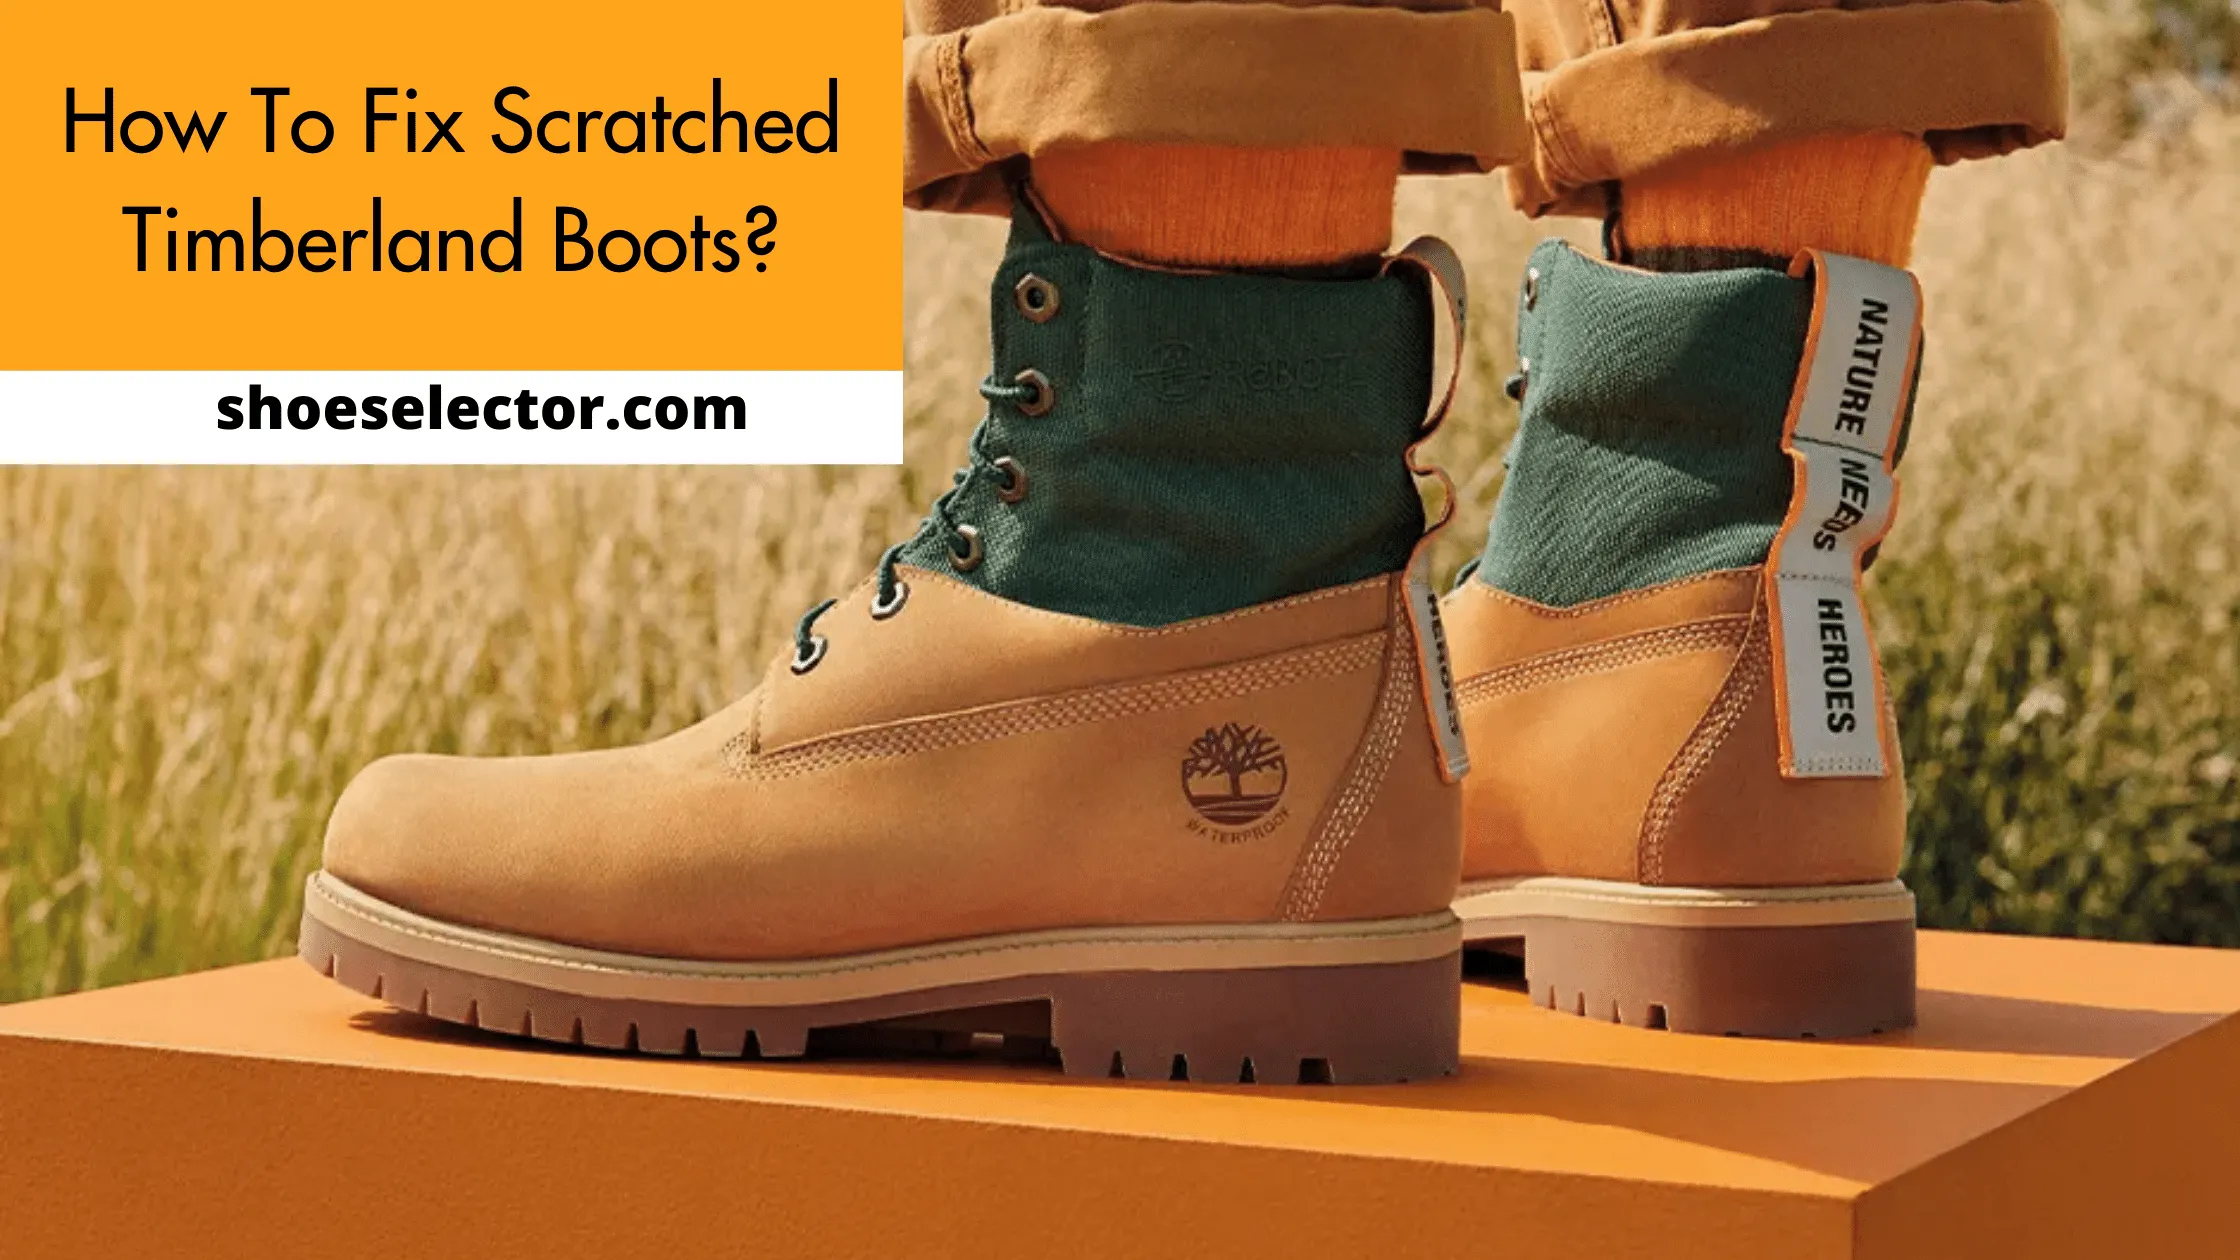 How To Fix Scratched Timberland Boots? - #1 Solution